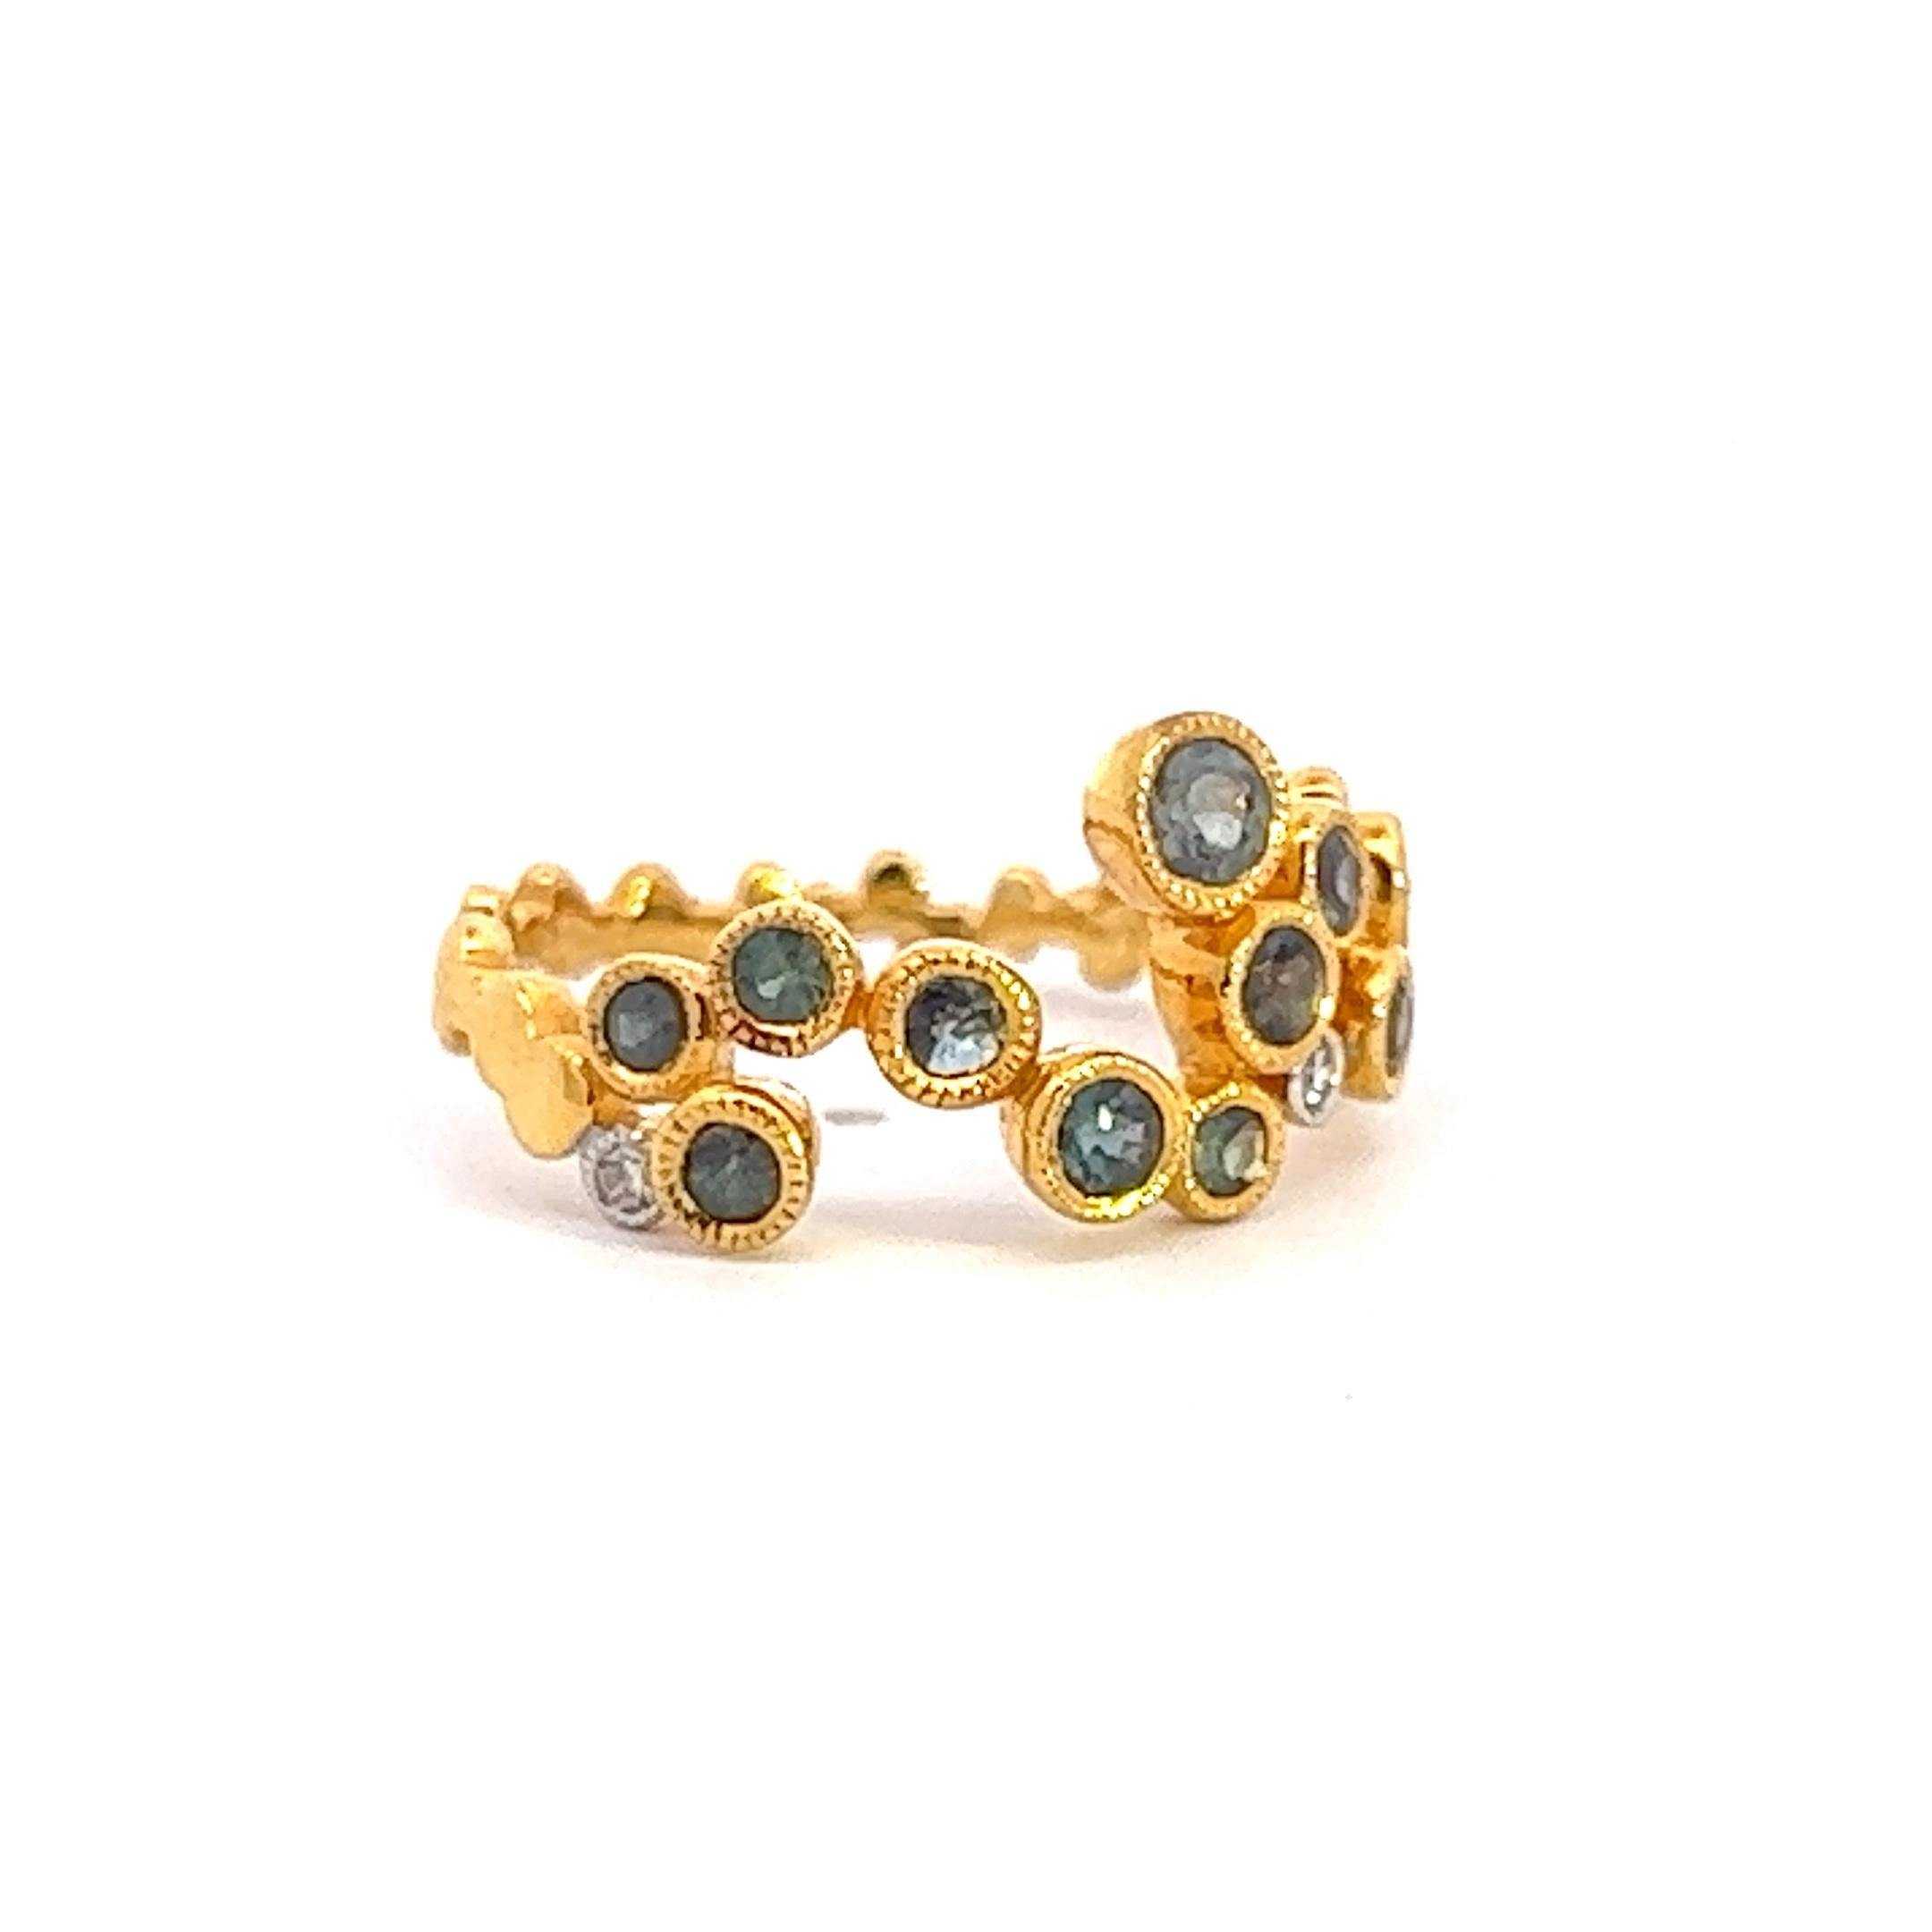 A wonderfully unique asymmetrical setting of mesmerizing round alexandrites and three small diamonds in 14k yellow gold. The alexandrites have great color change and weigh .89 ctw, and the diamonds .08 ctw. Size 6, but can easily be resized.